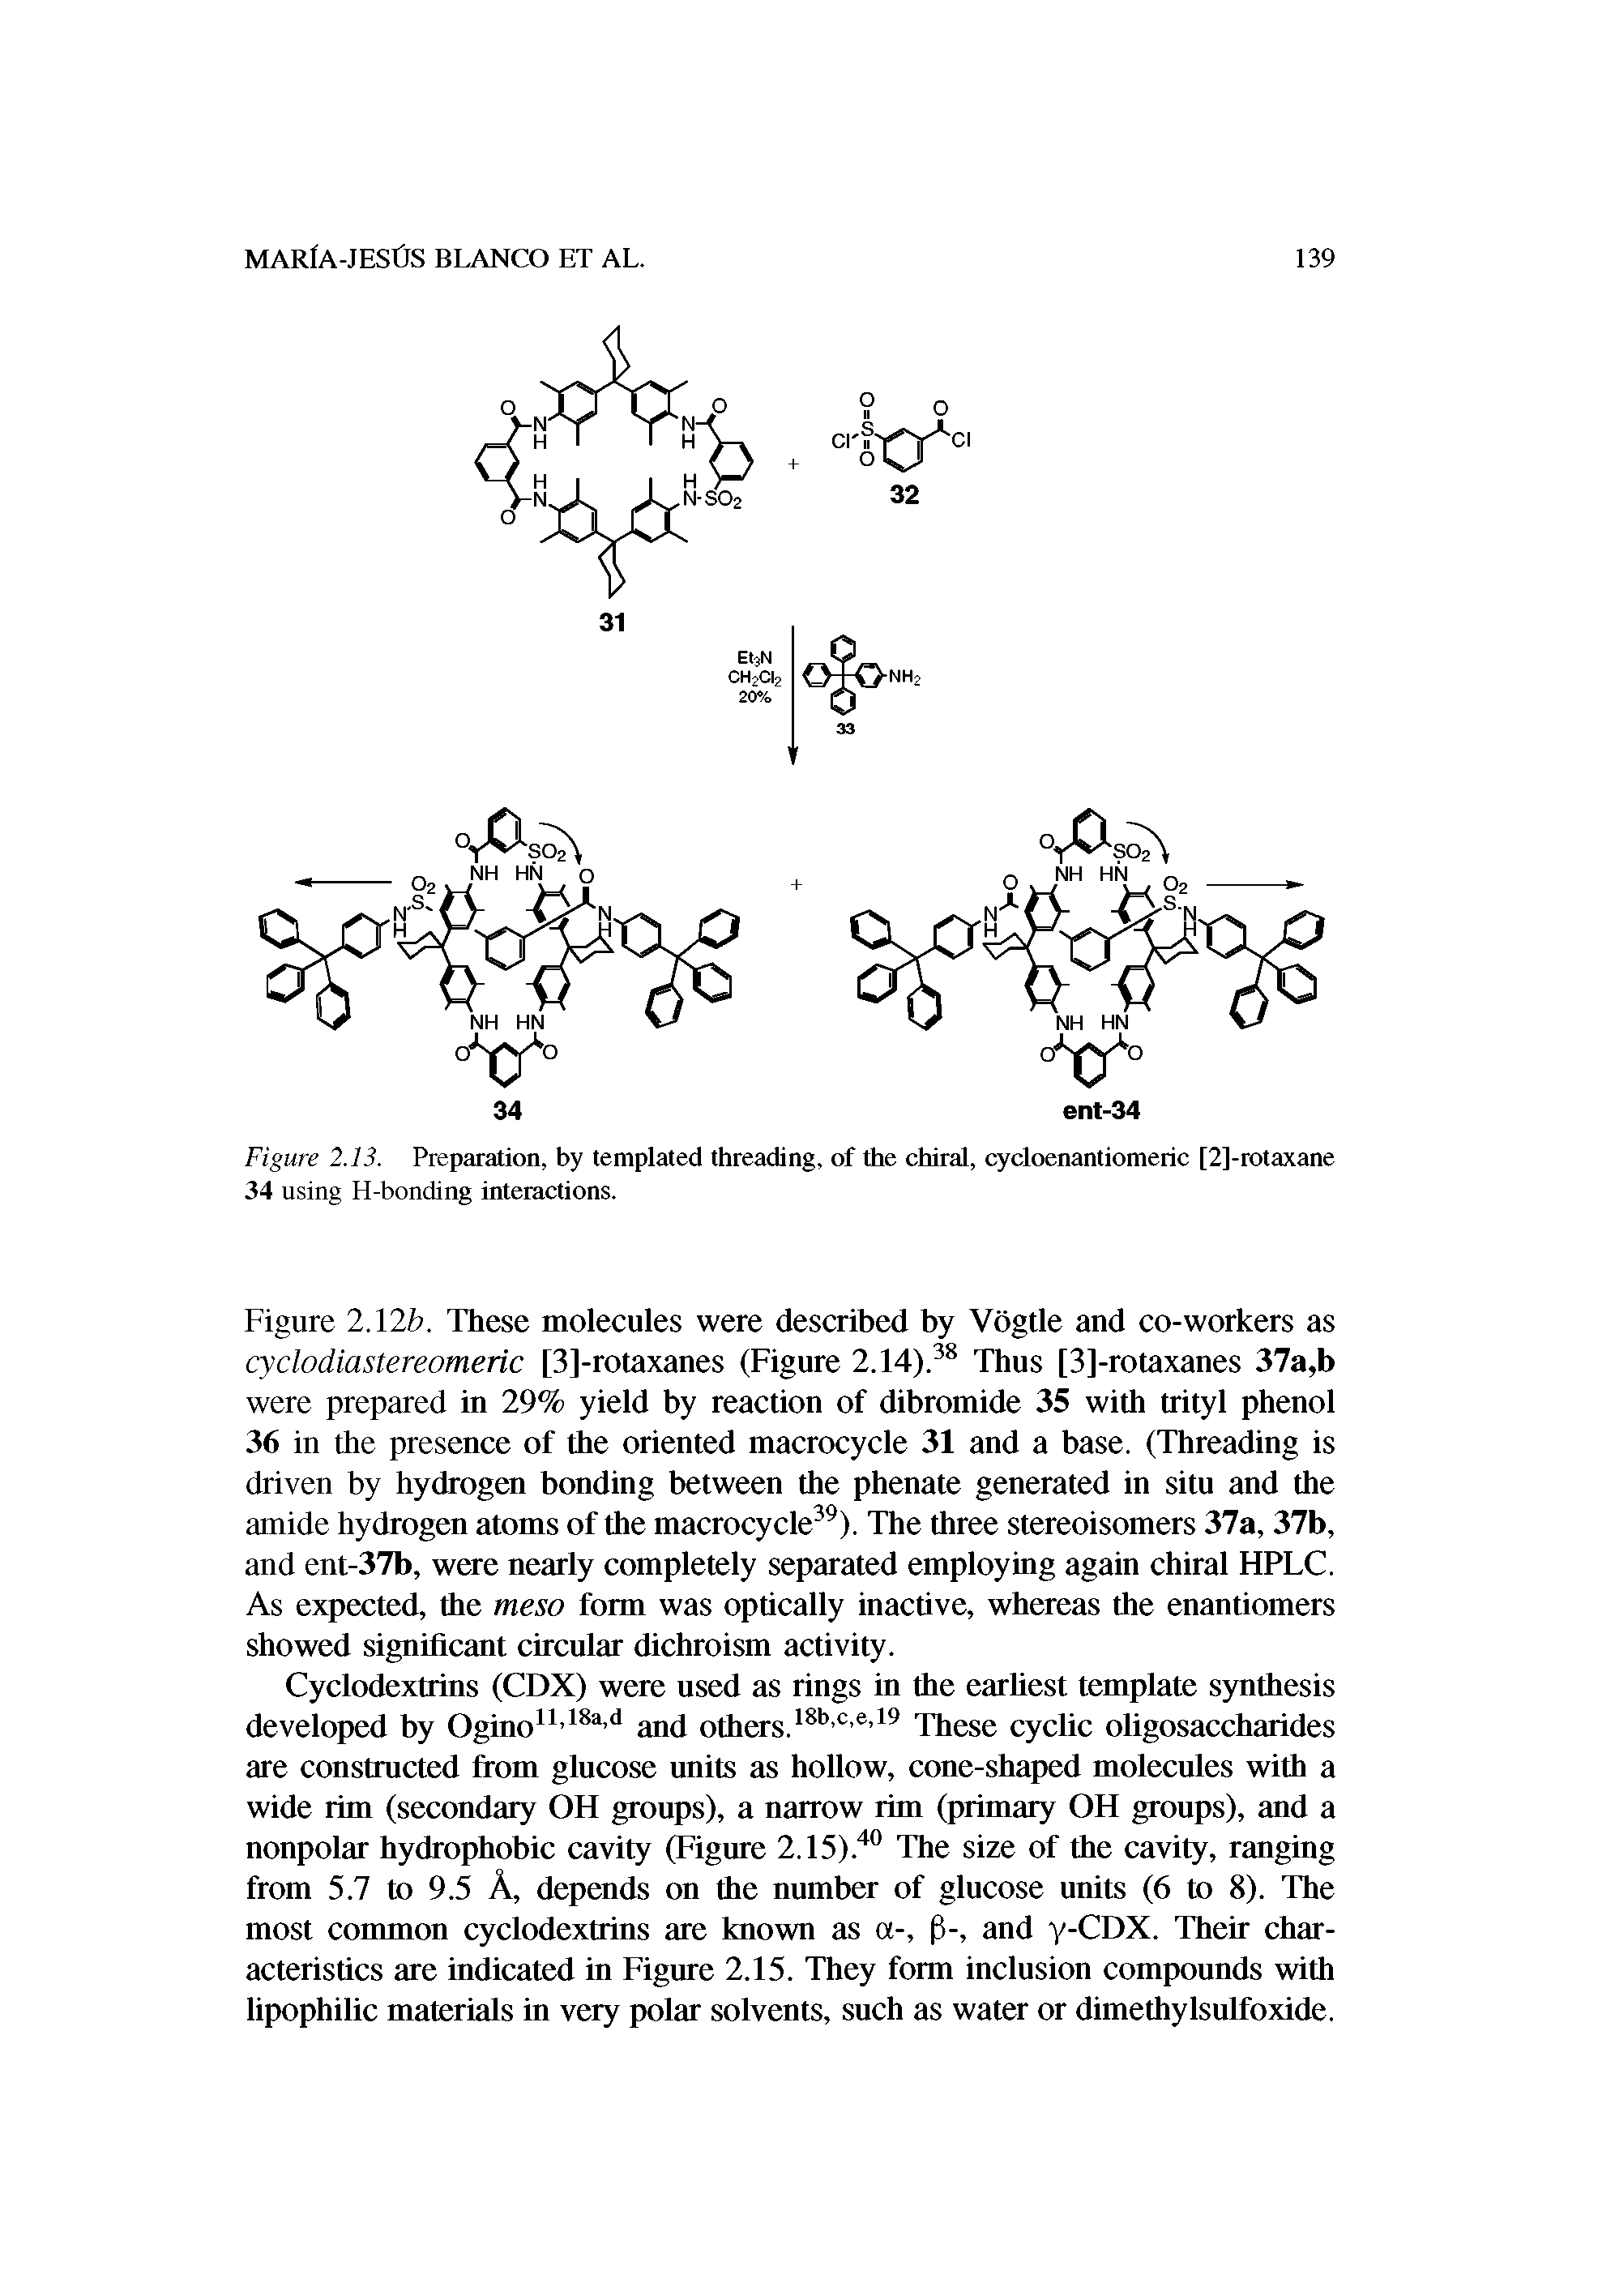 Figure 2.13. Preparation, by templated threading, of the chiral, cycloenantiomeric [2]-rotaxane...